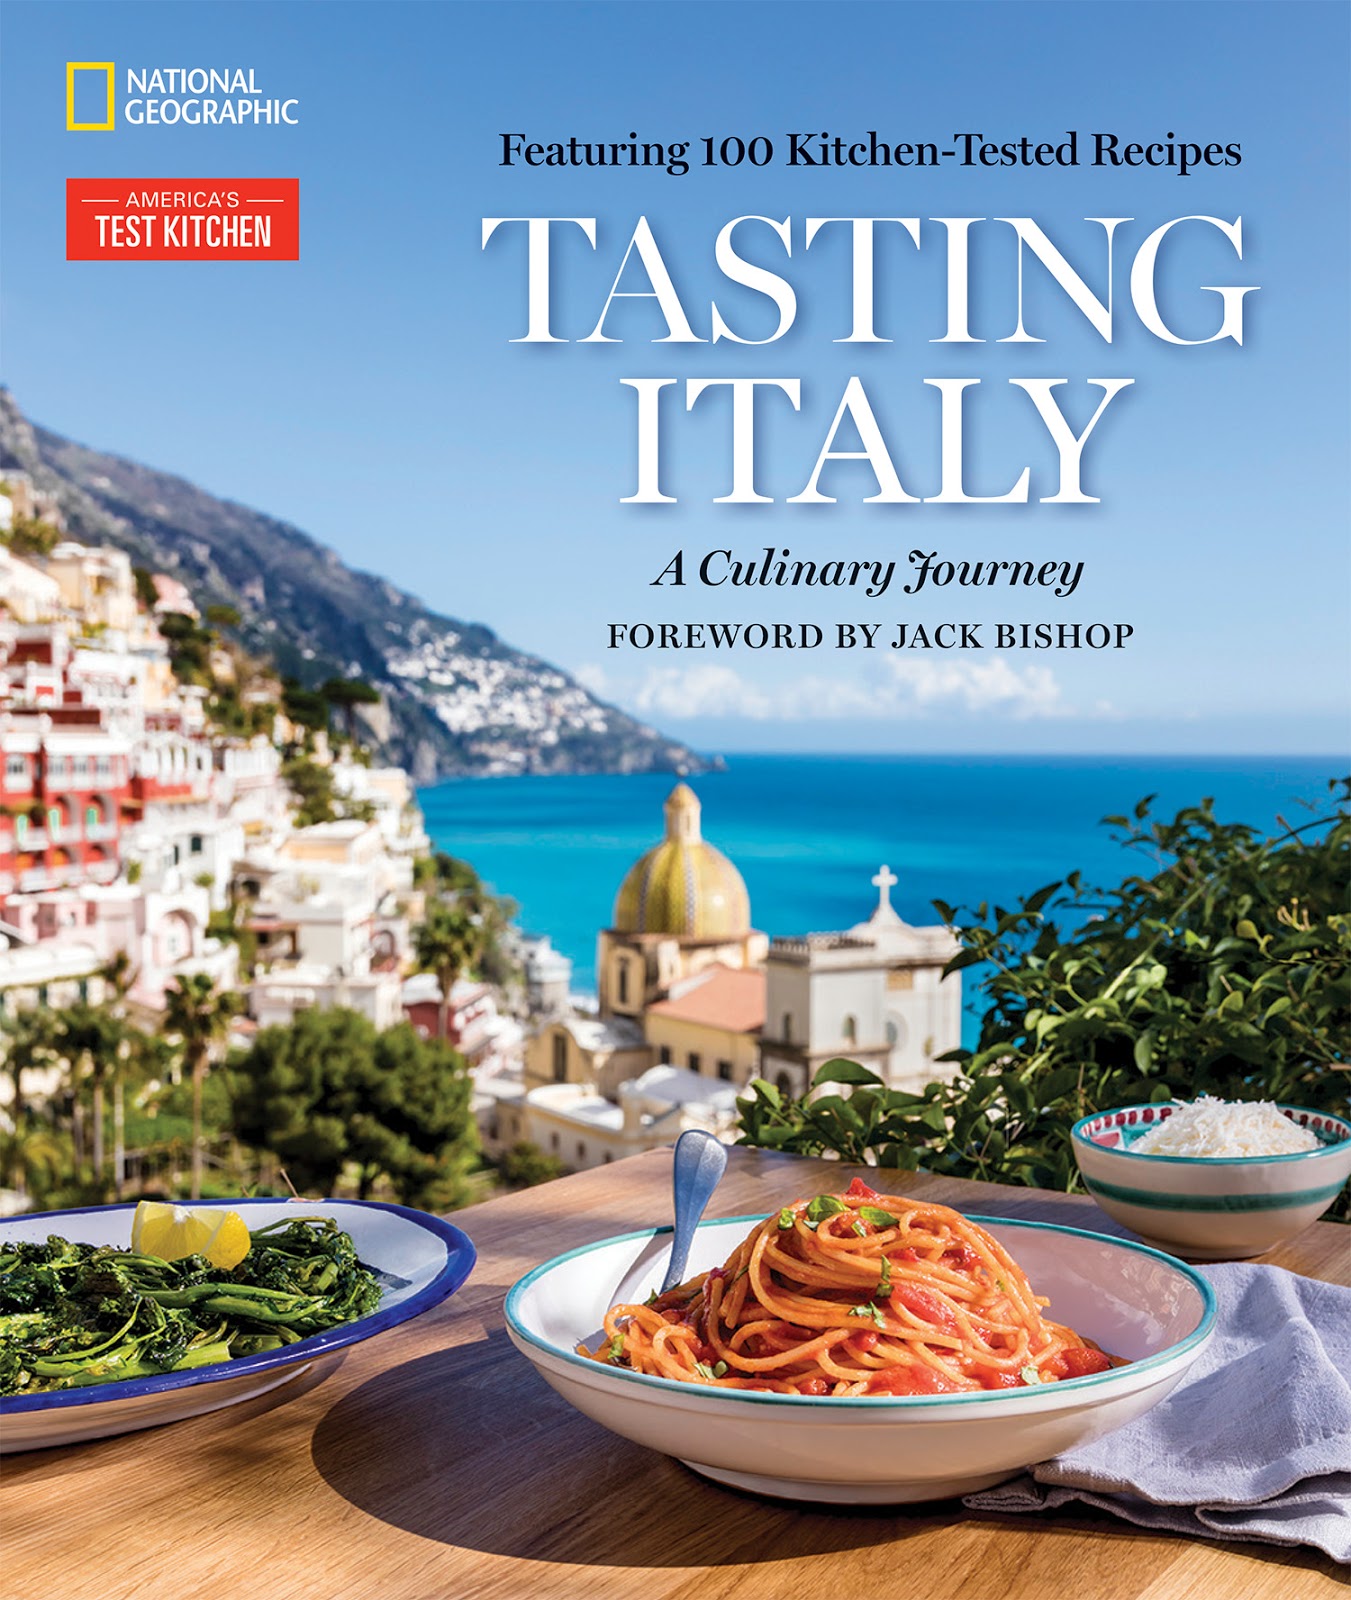 Staircase Wit: Tasting Italy: A Culinary Journey (Book Review)